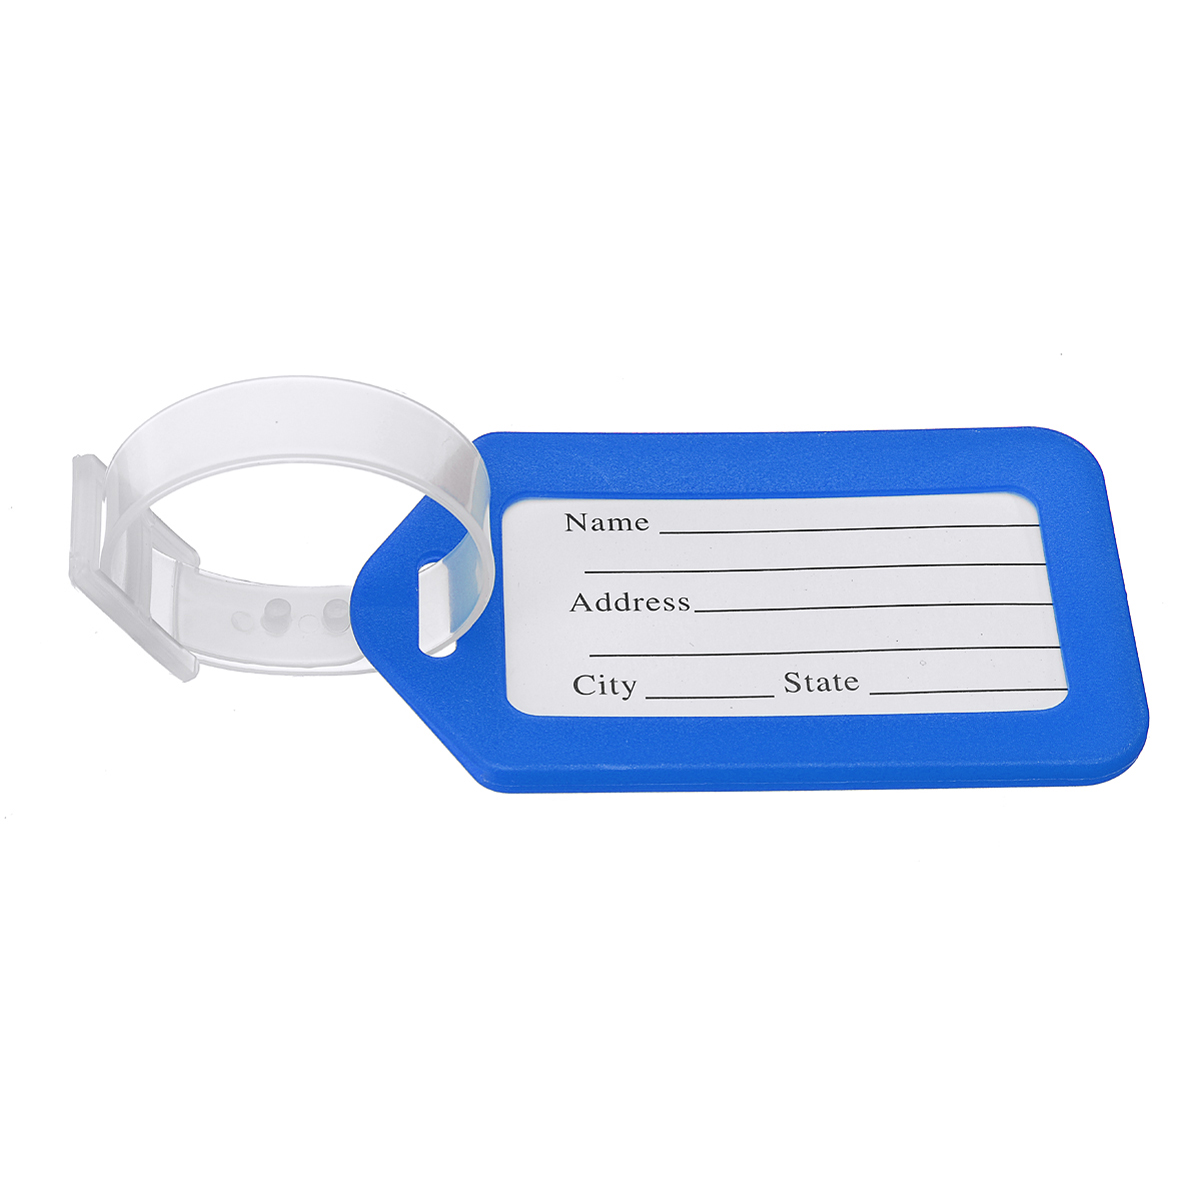 10-Pcs-Luggage-Bag-Tag-Name-Address-ID-Label-Plastic-Travel-Bag-Tags-for-Suitcase-Bag-1714336-7